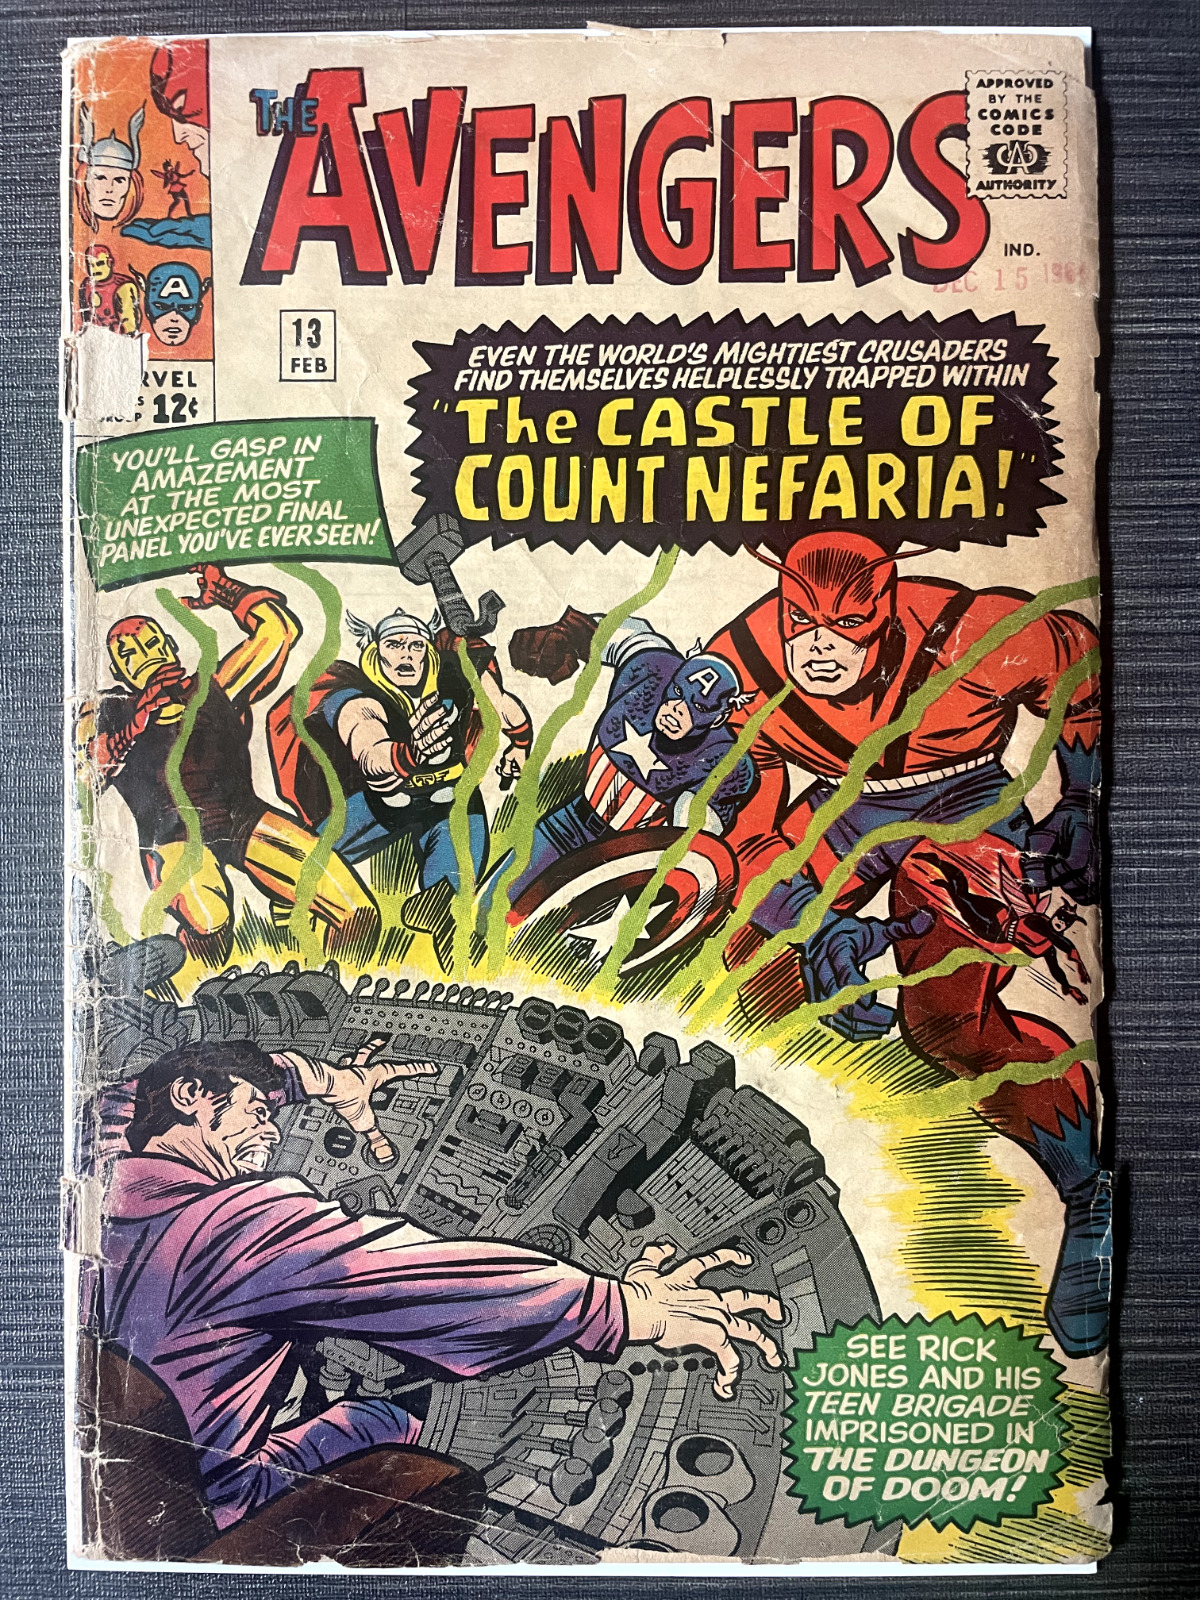 Avengers #13 (1965) Silver Age Marvel Comic Book 1st Count Nefaria Jack Kirby